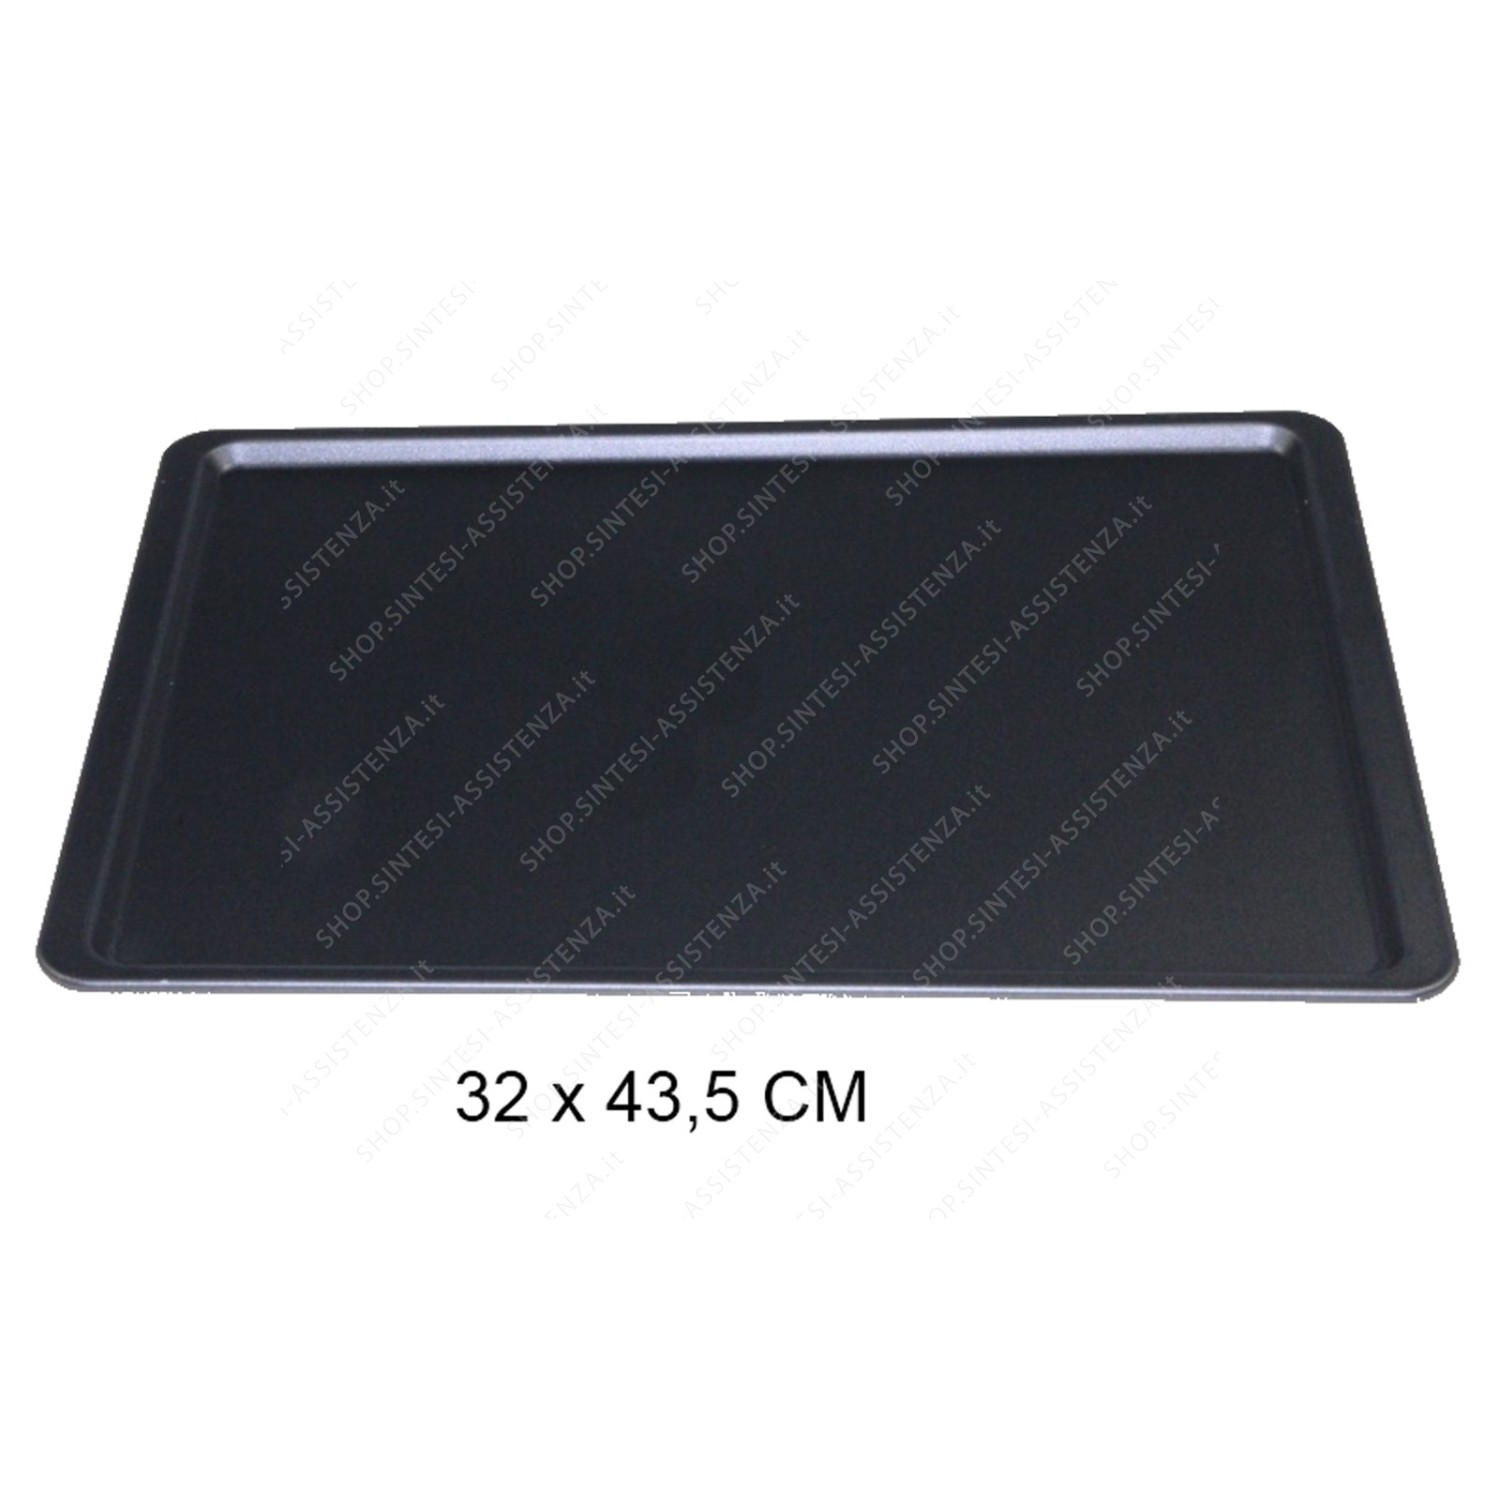 TEFLON-COATED TRAY FOR SMEG BRIOCHES OVEN MEASURES: 32 X 43.5 CM - 030370439 S